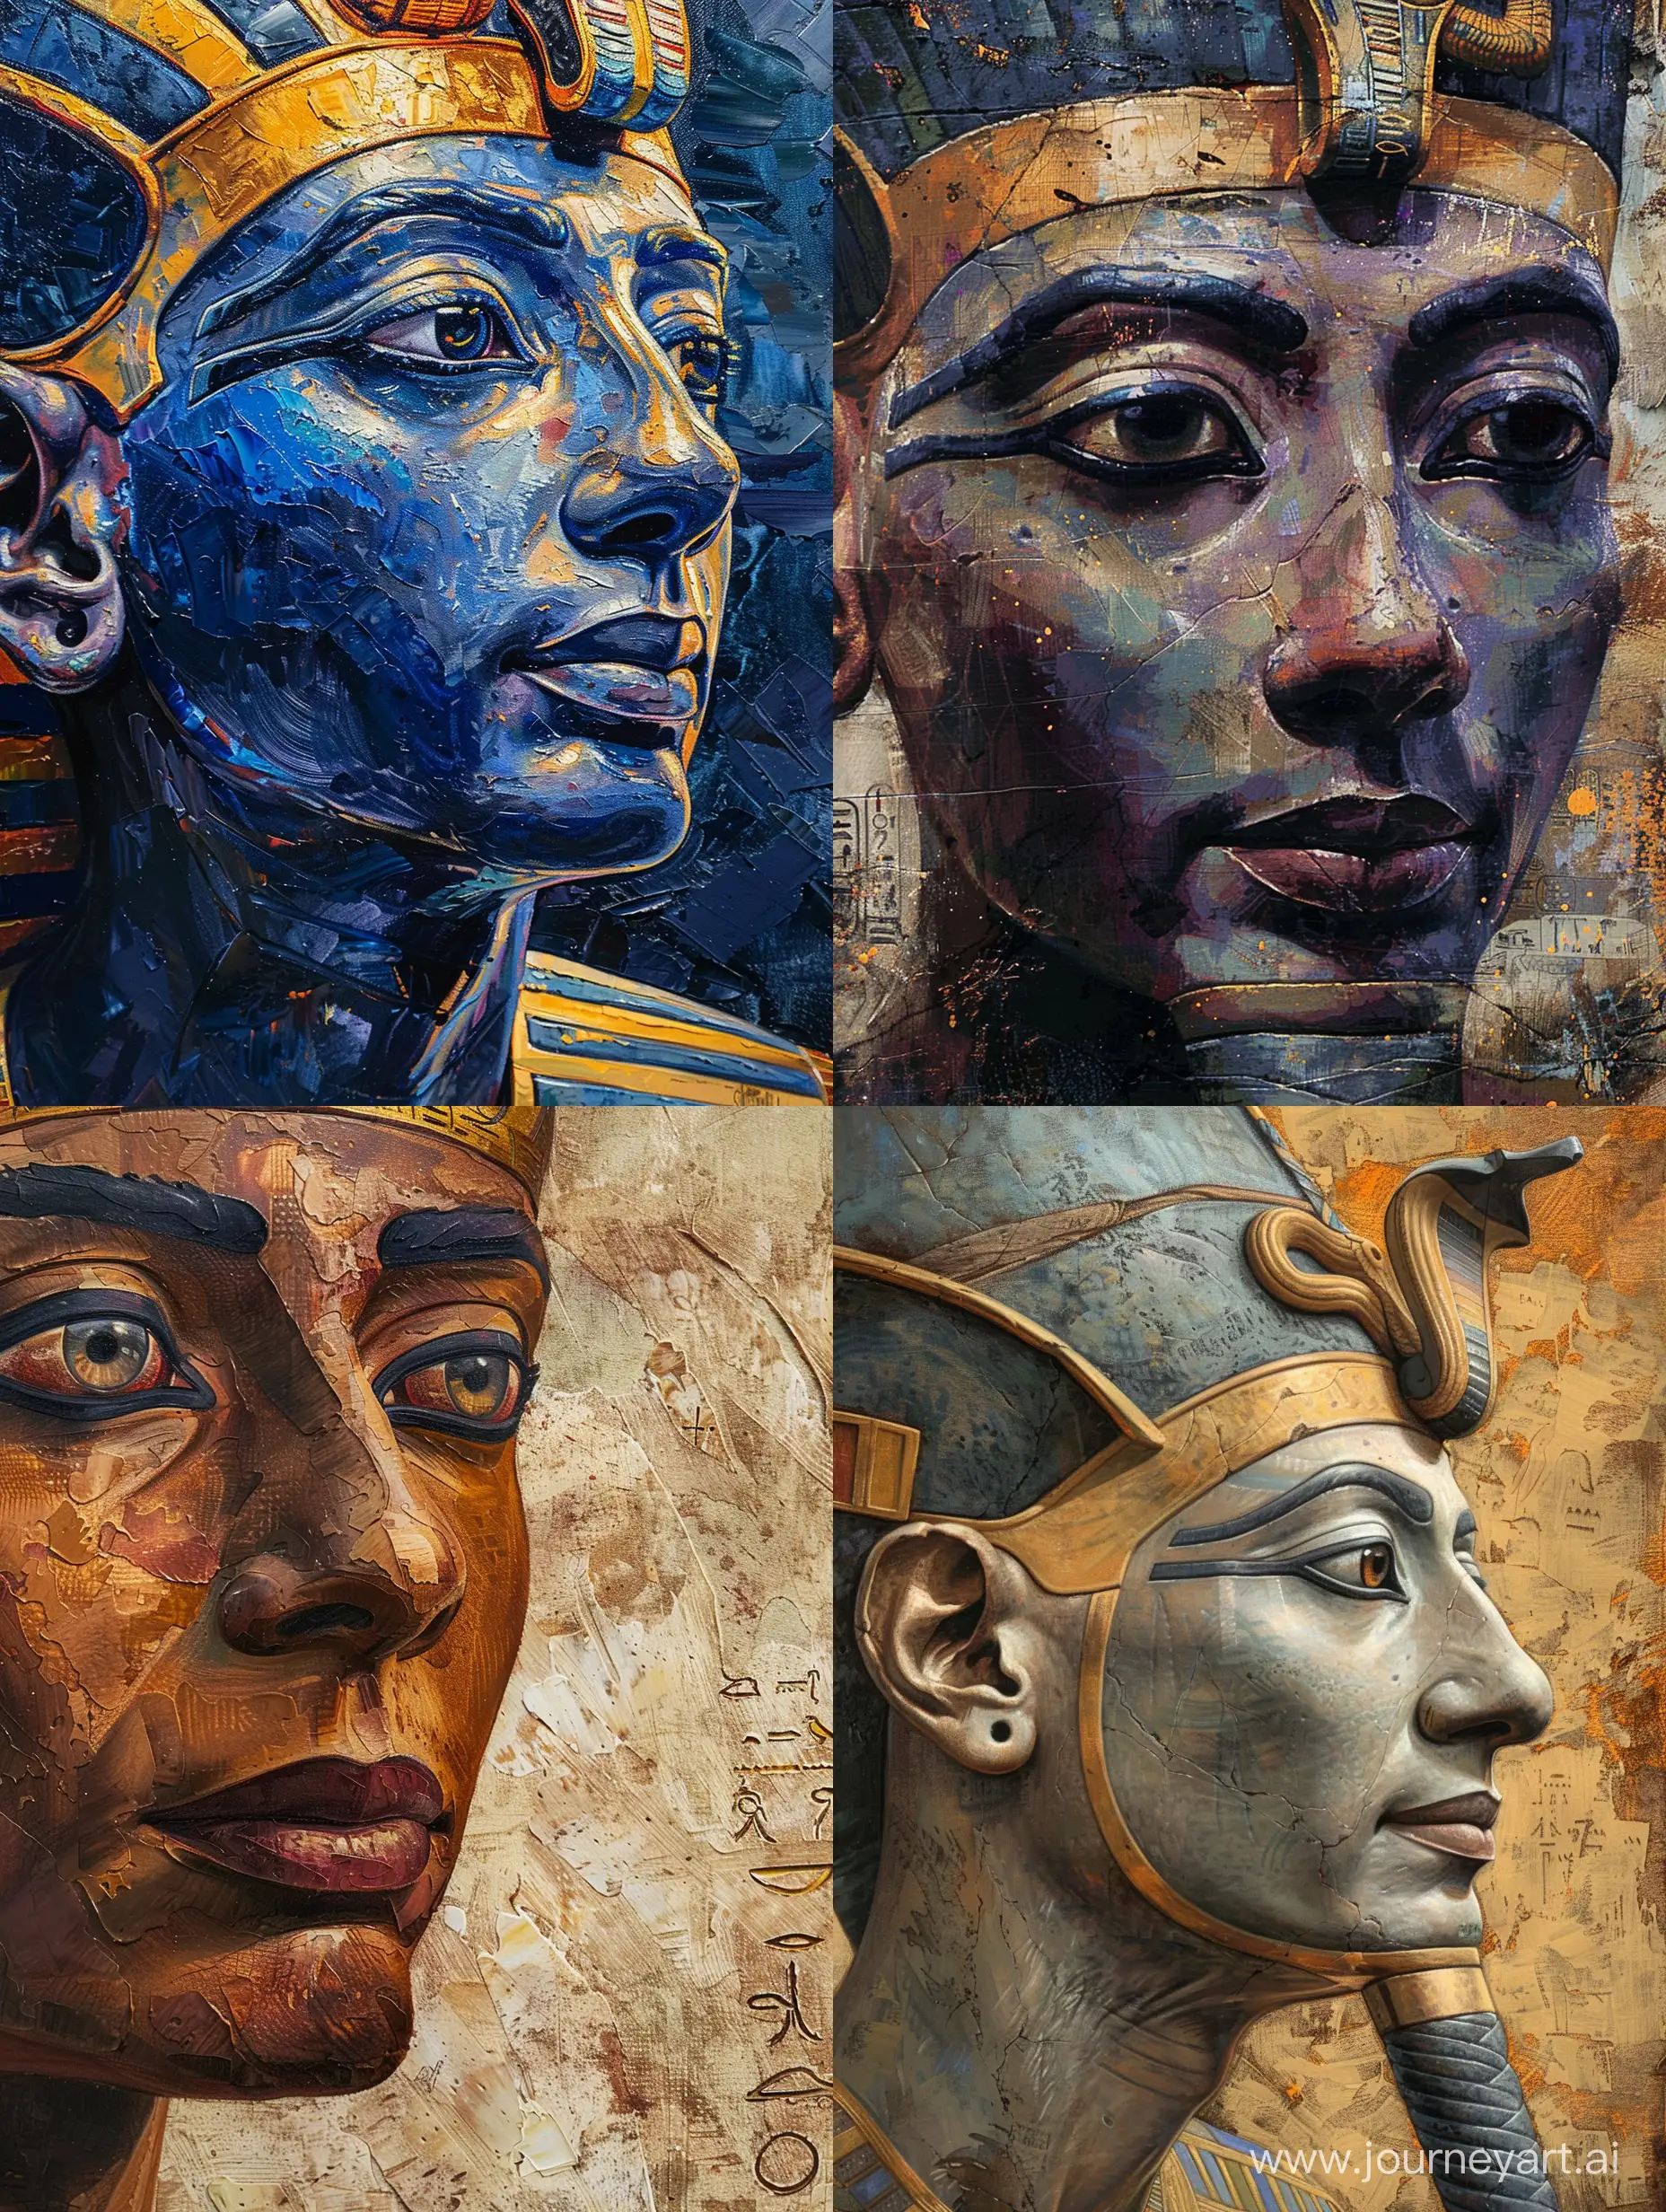 CloseUp-Portrait-of-Osiris-Ancient-Egyptian-God-with-Intricate-Oil-Painting-Details